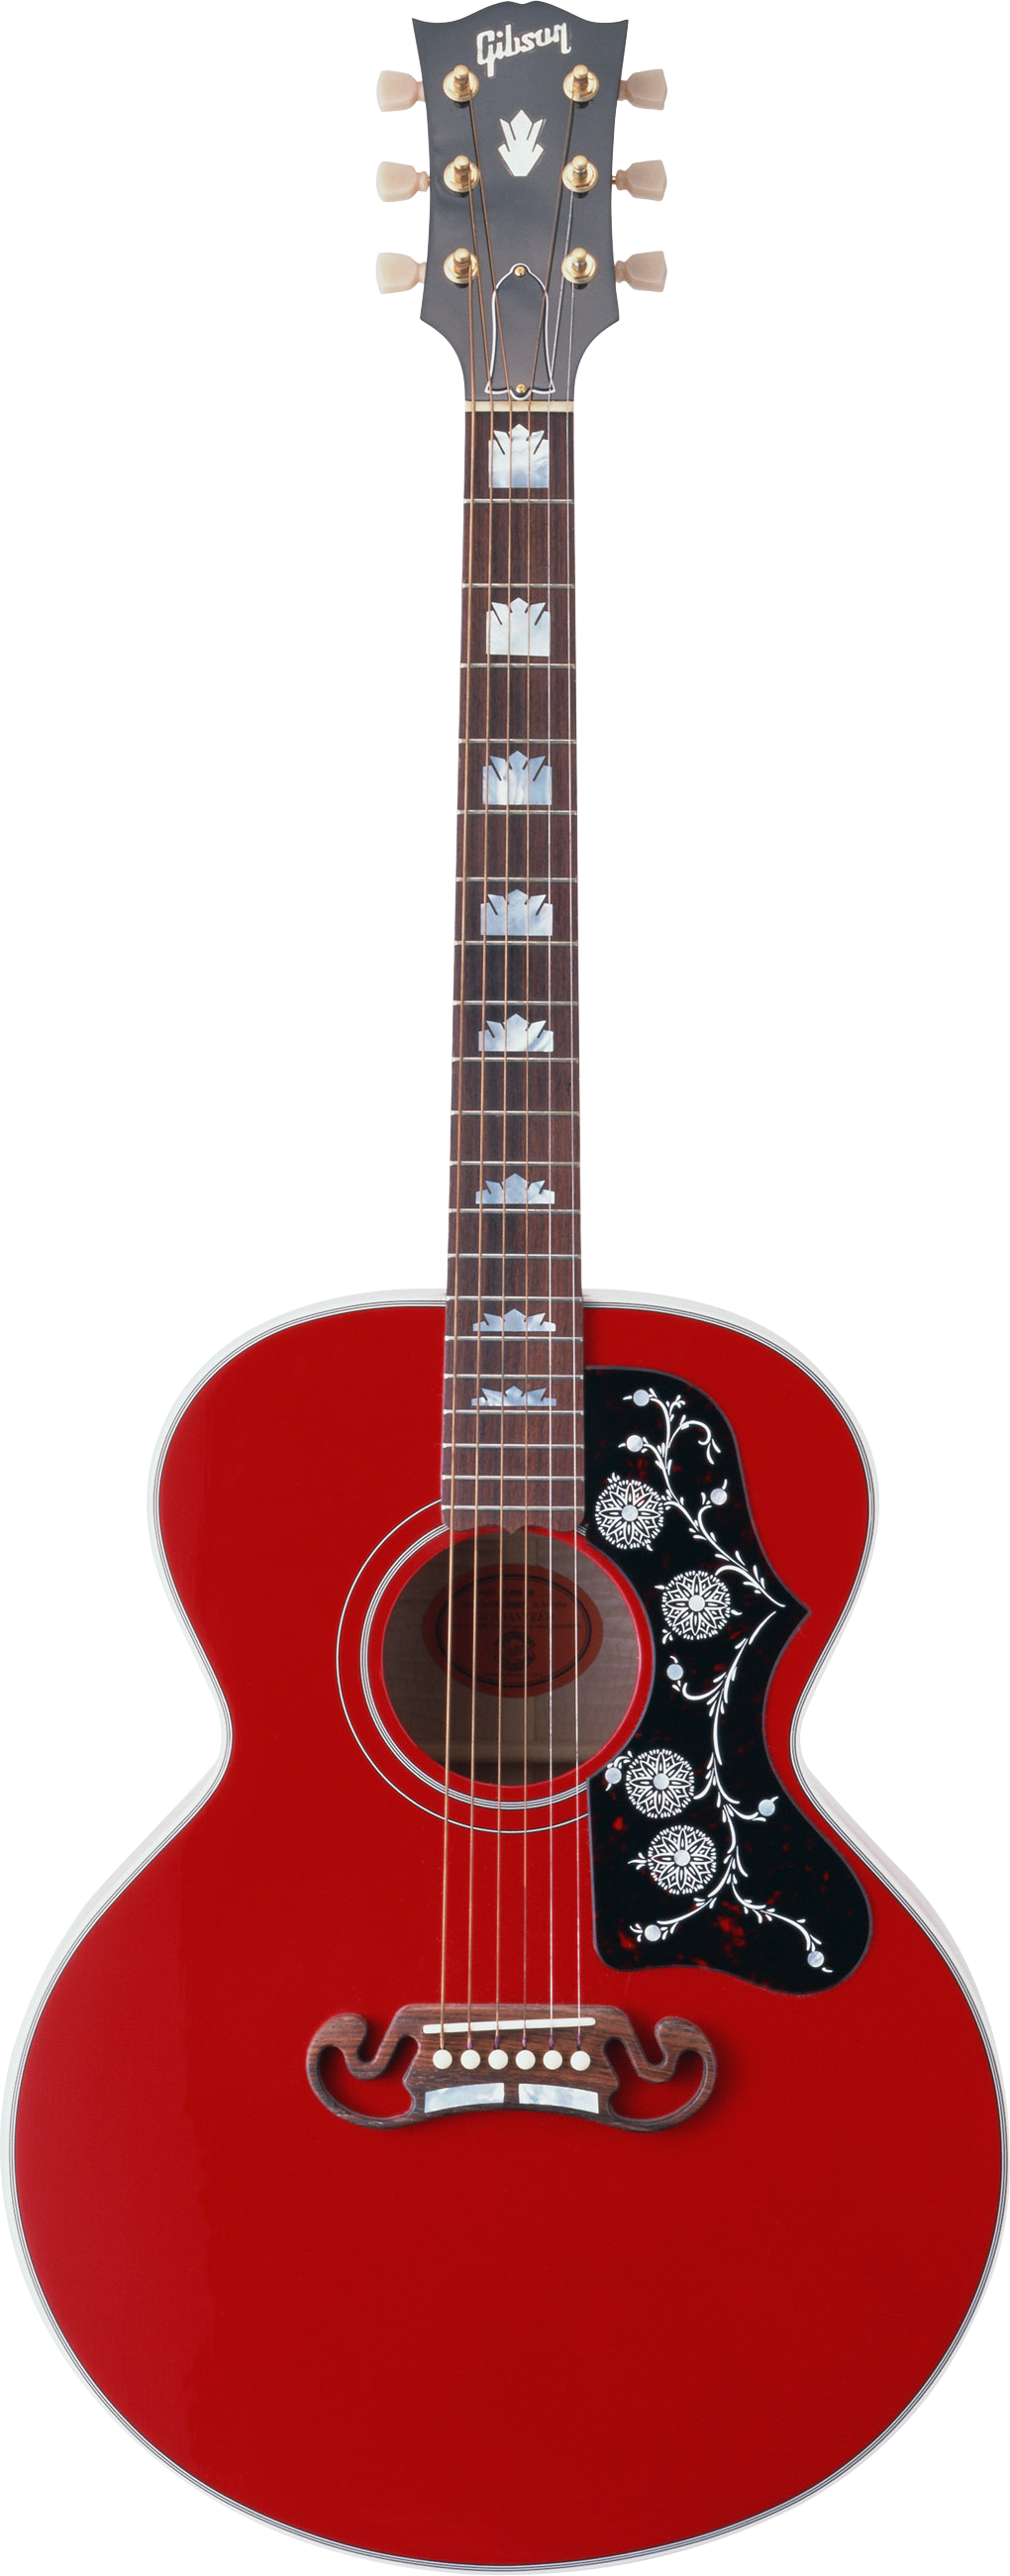 Red Electric Guitar PNG Background Image